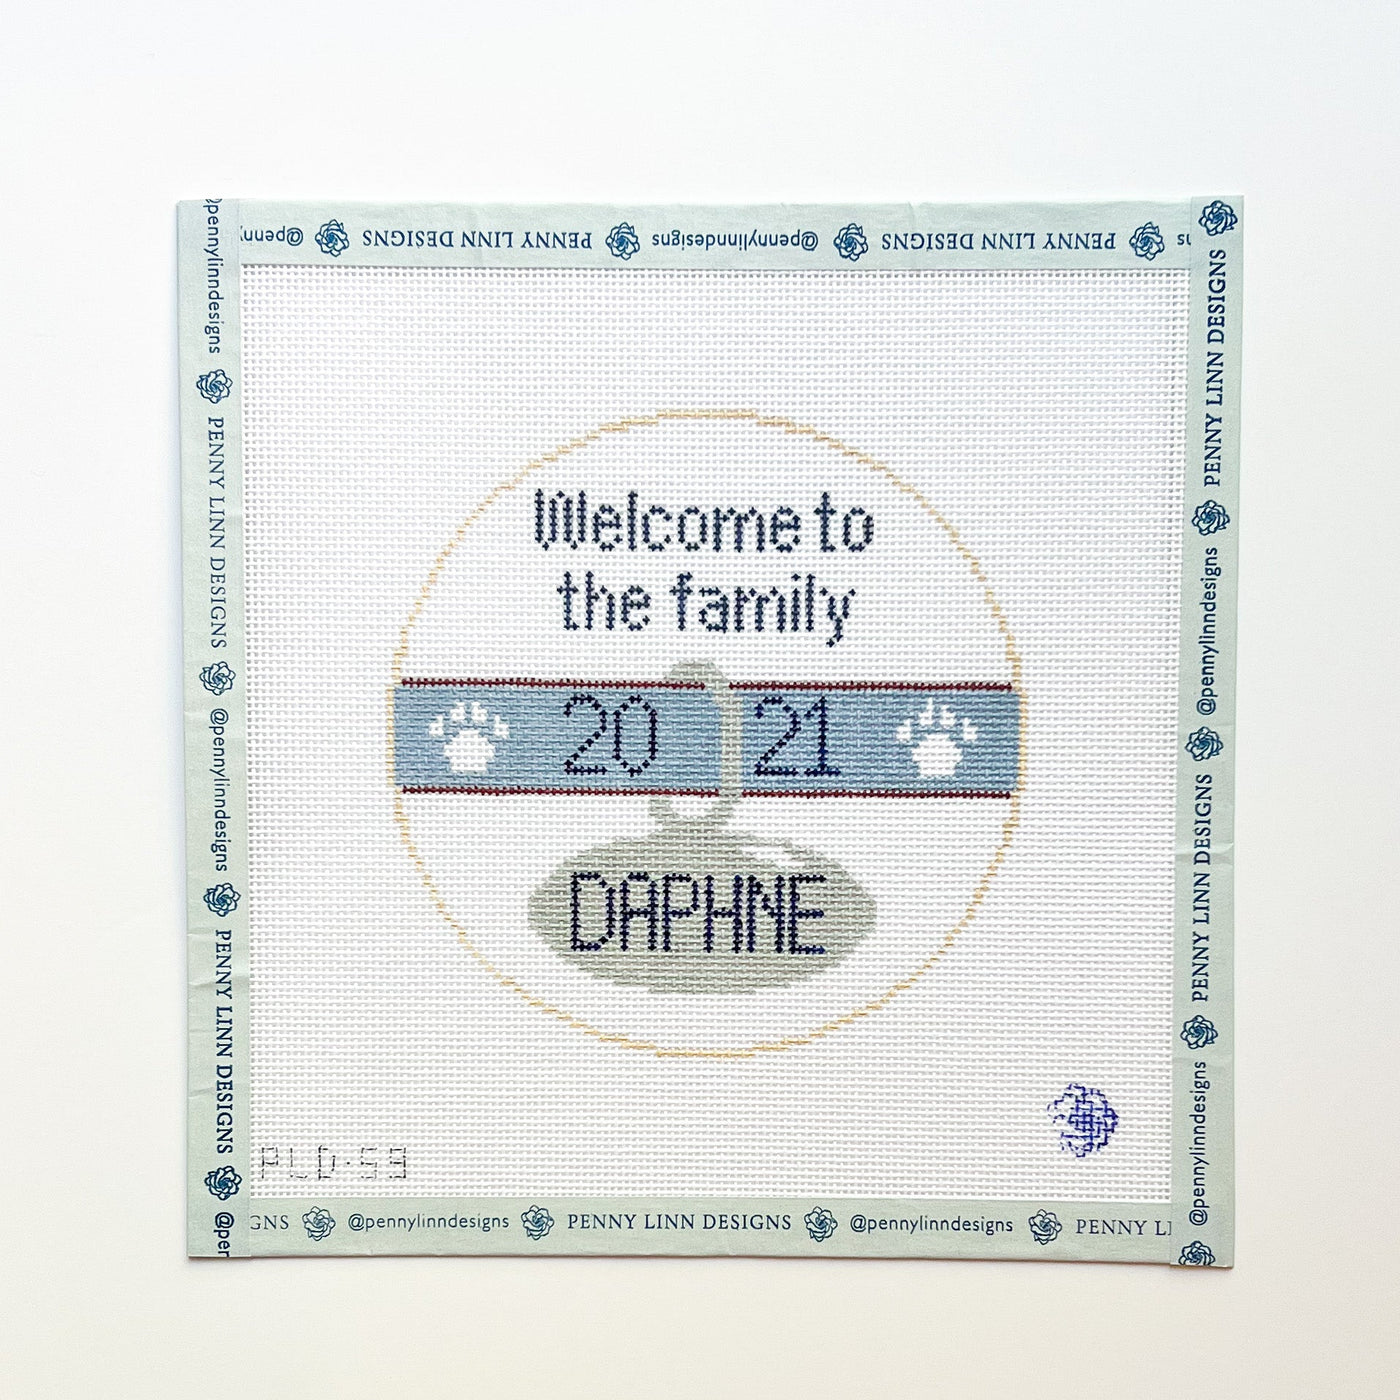 Welcome to the Family - Pet - Penny Linn Designs - Penny Linn Designs